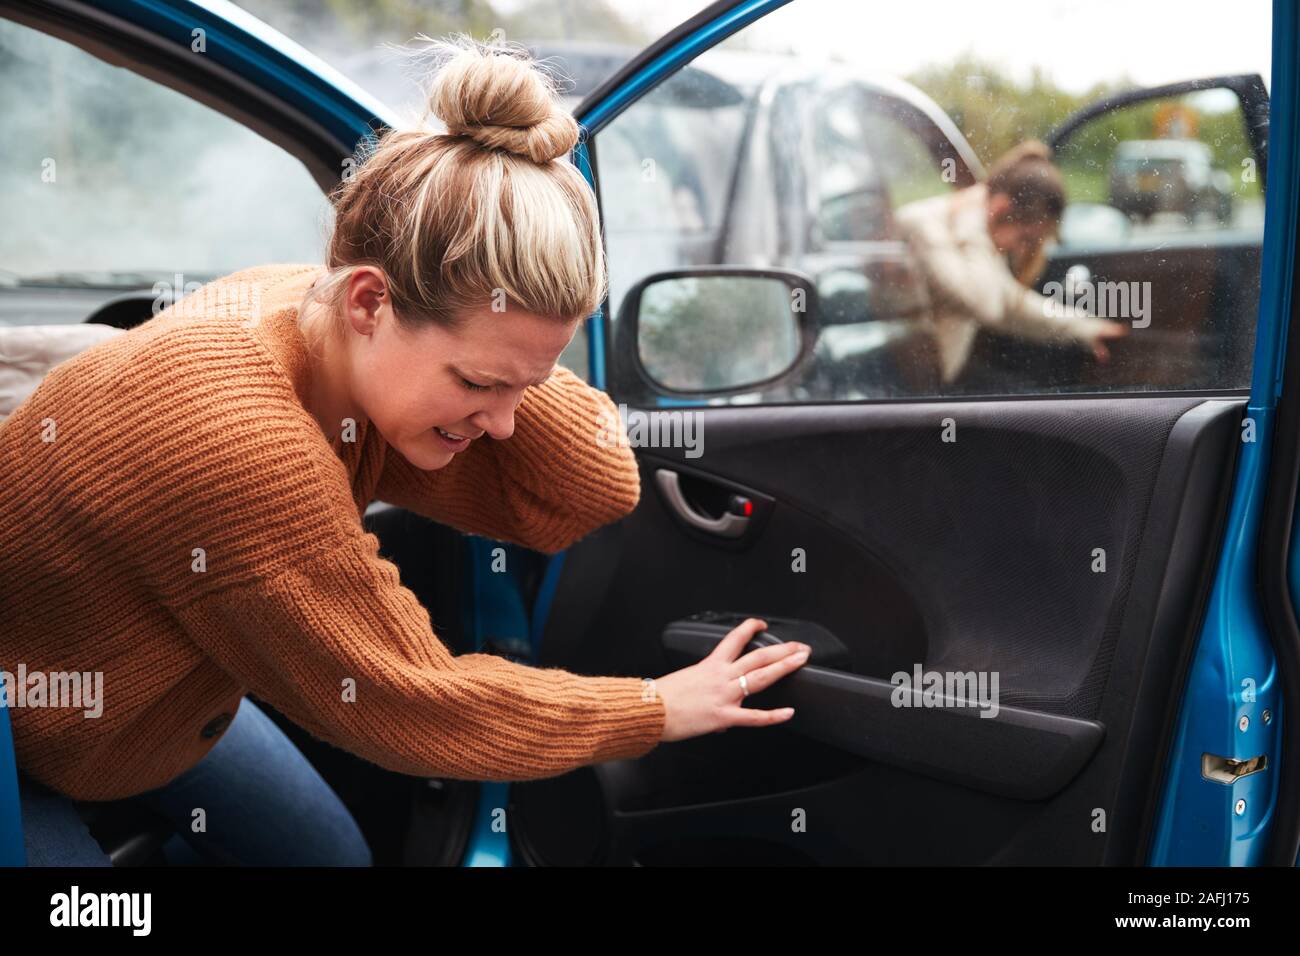 Female Motorist In Crash For Crash Insurance Fraud Getting Out Of Car Stock Photo